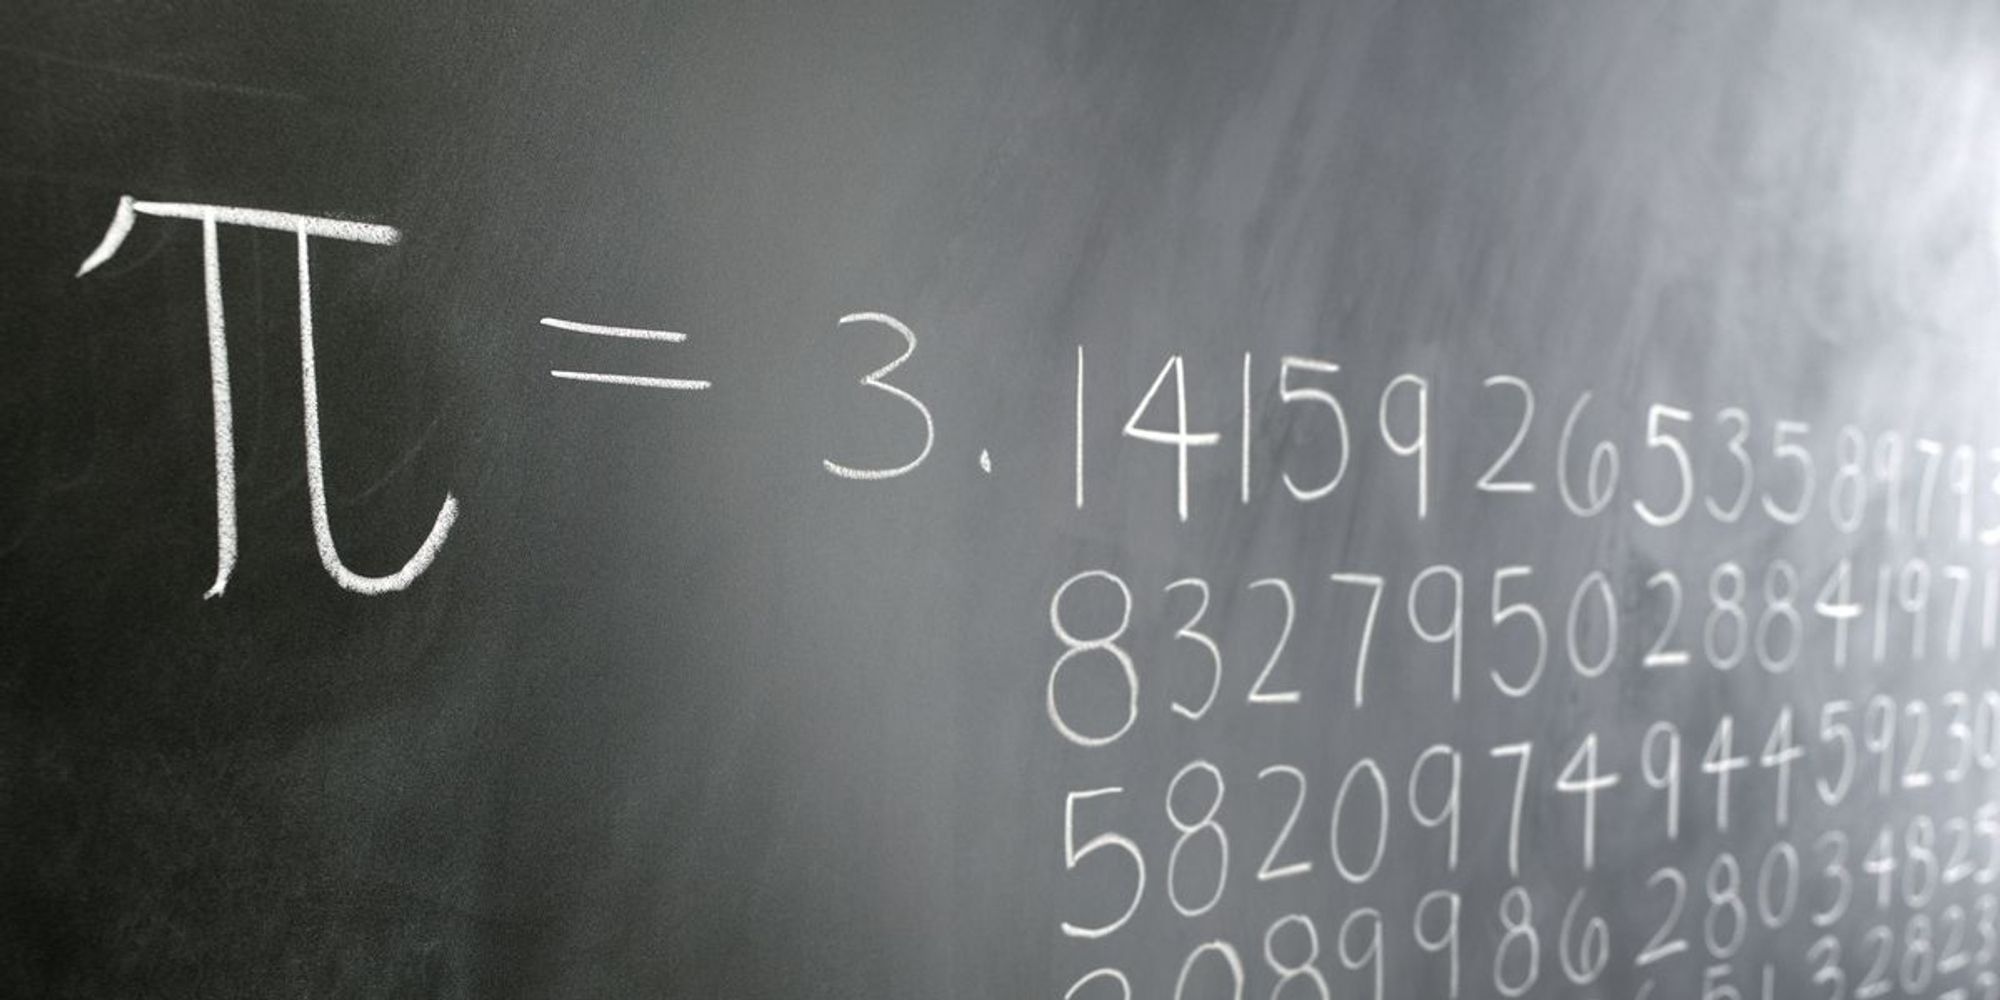 How Many Digits Of Pi Have Been Calculated?